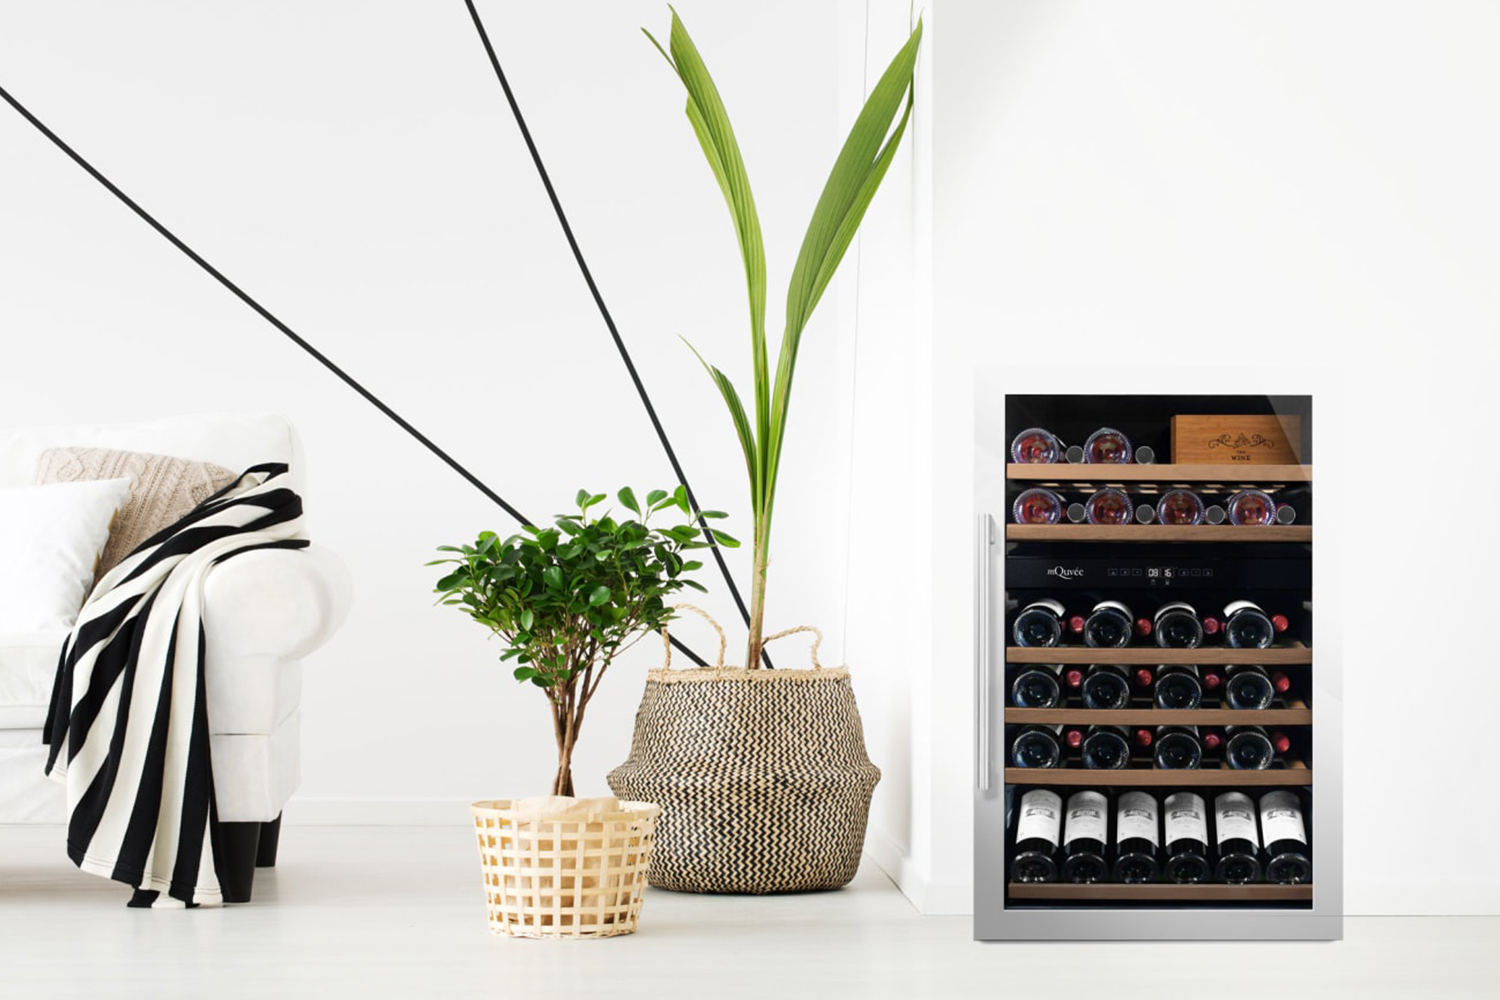 A free-standing wine cooler from mquvee